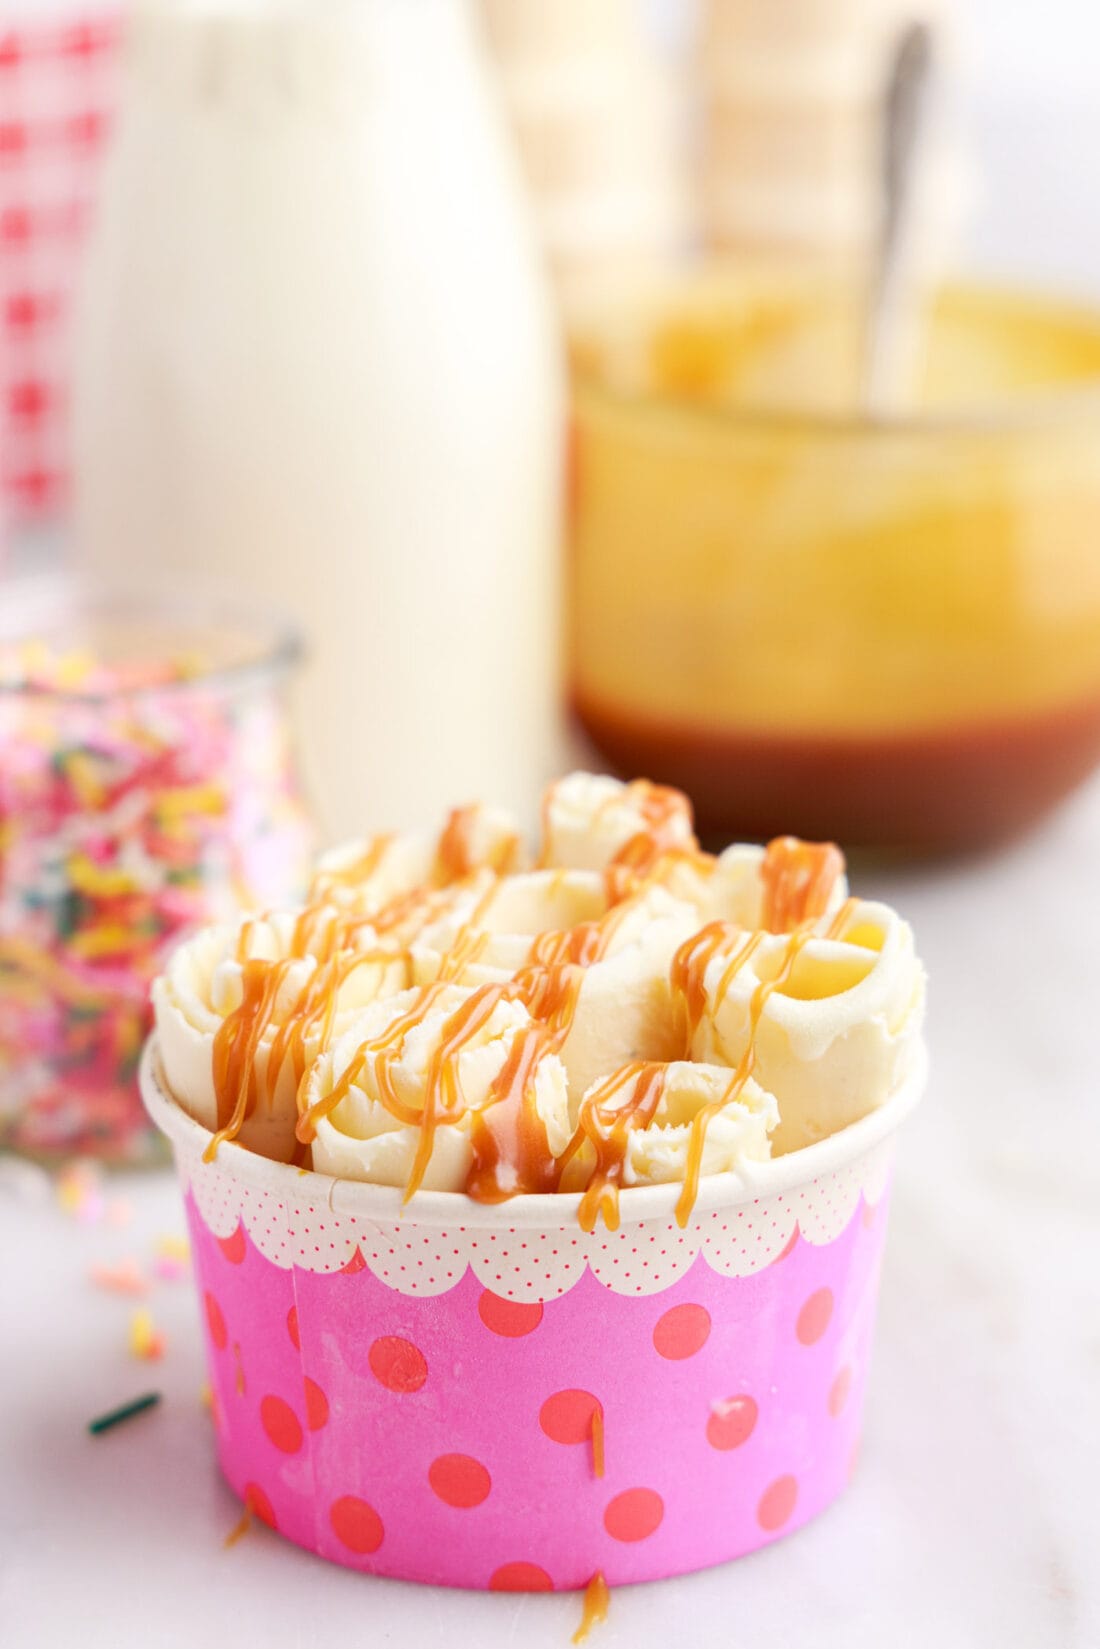 Rolled Ice Cream with caramel drizzle